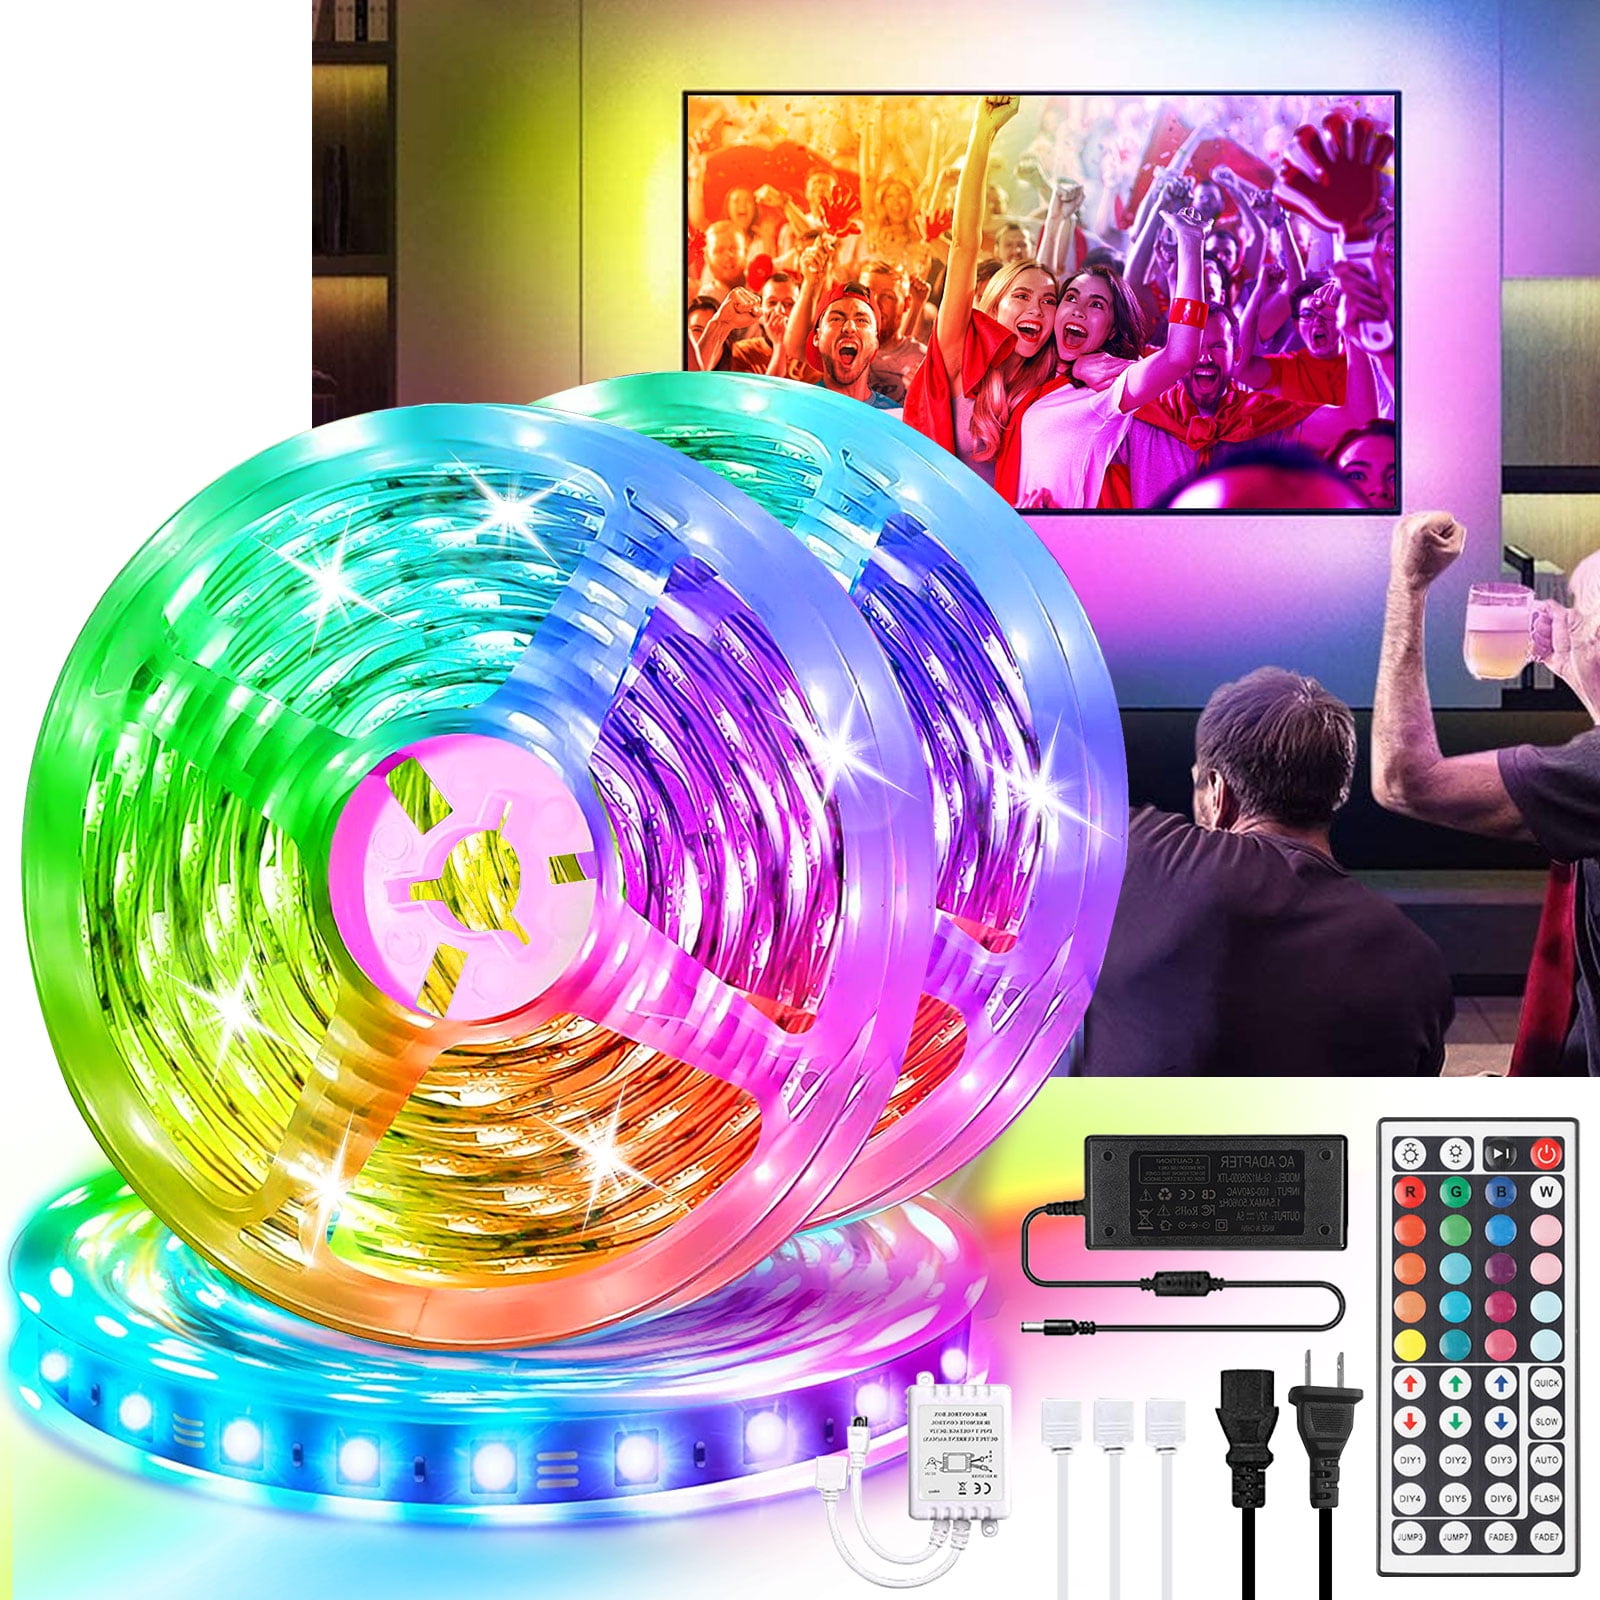 TSV 50ft LED Strip Light 3528 RGB with Remote, Waterproof for Home Bedroom Indoor Outdoor Decor - image 1 of 8